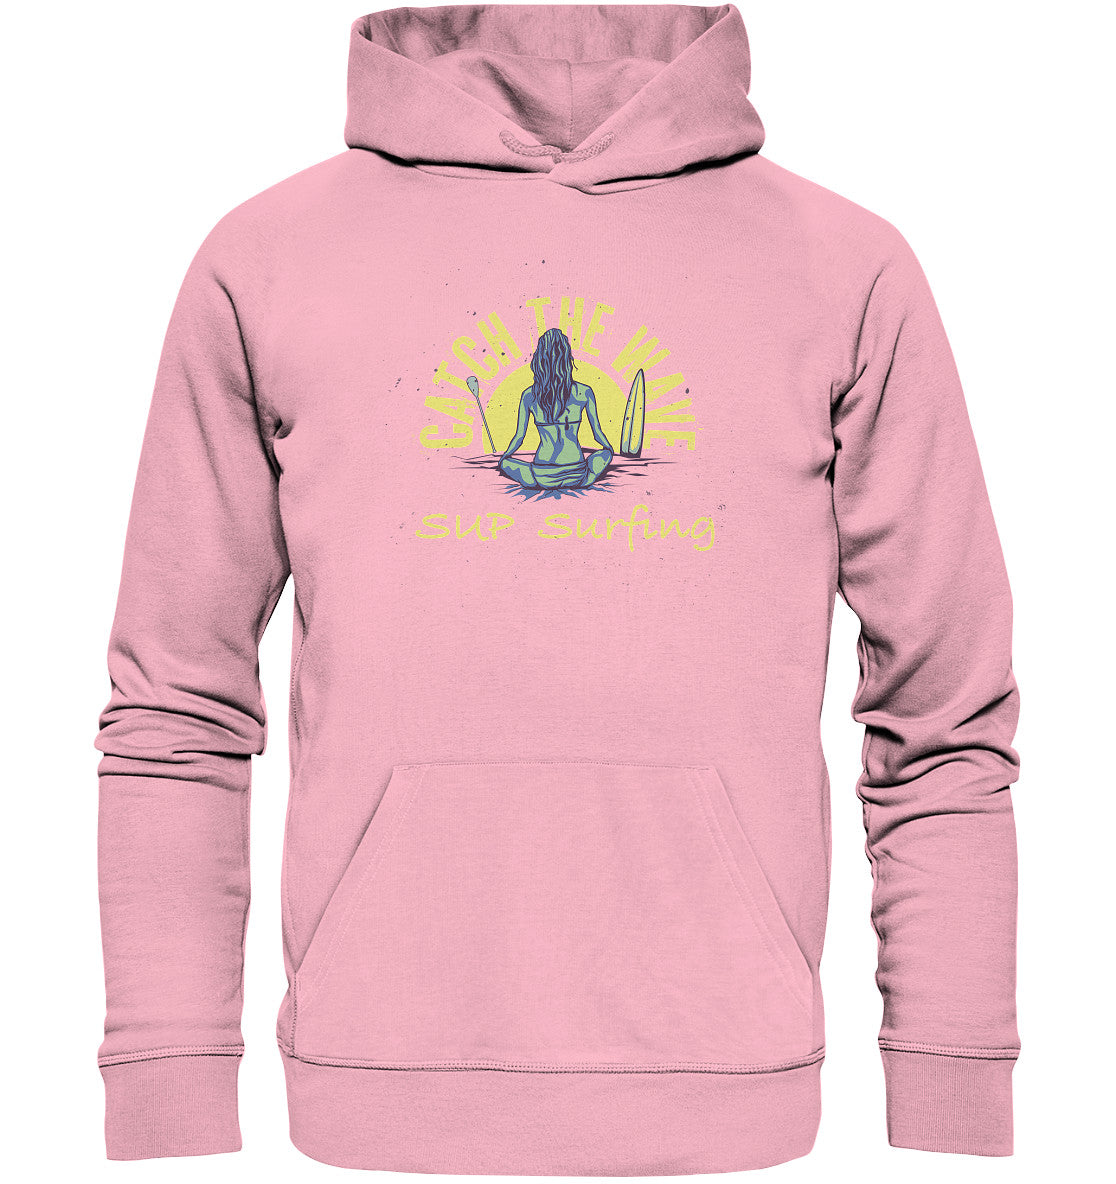 Catch The Wave-SUP-Surfing - Organic Hoodie